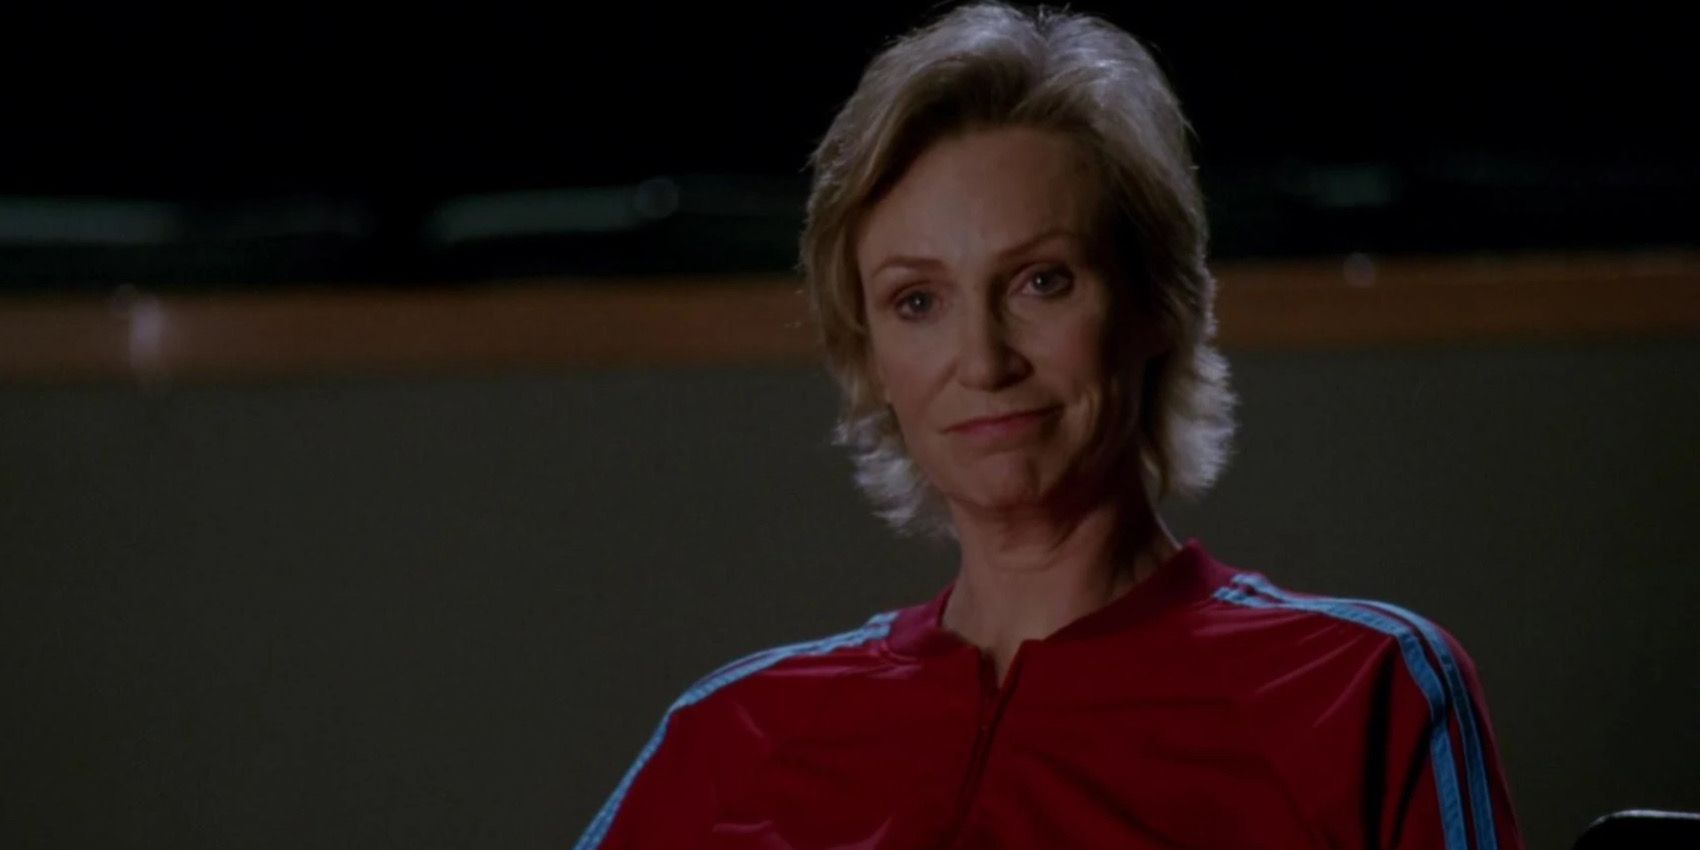 Jane Lynch as Sue Sylvester on Glee